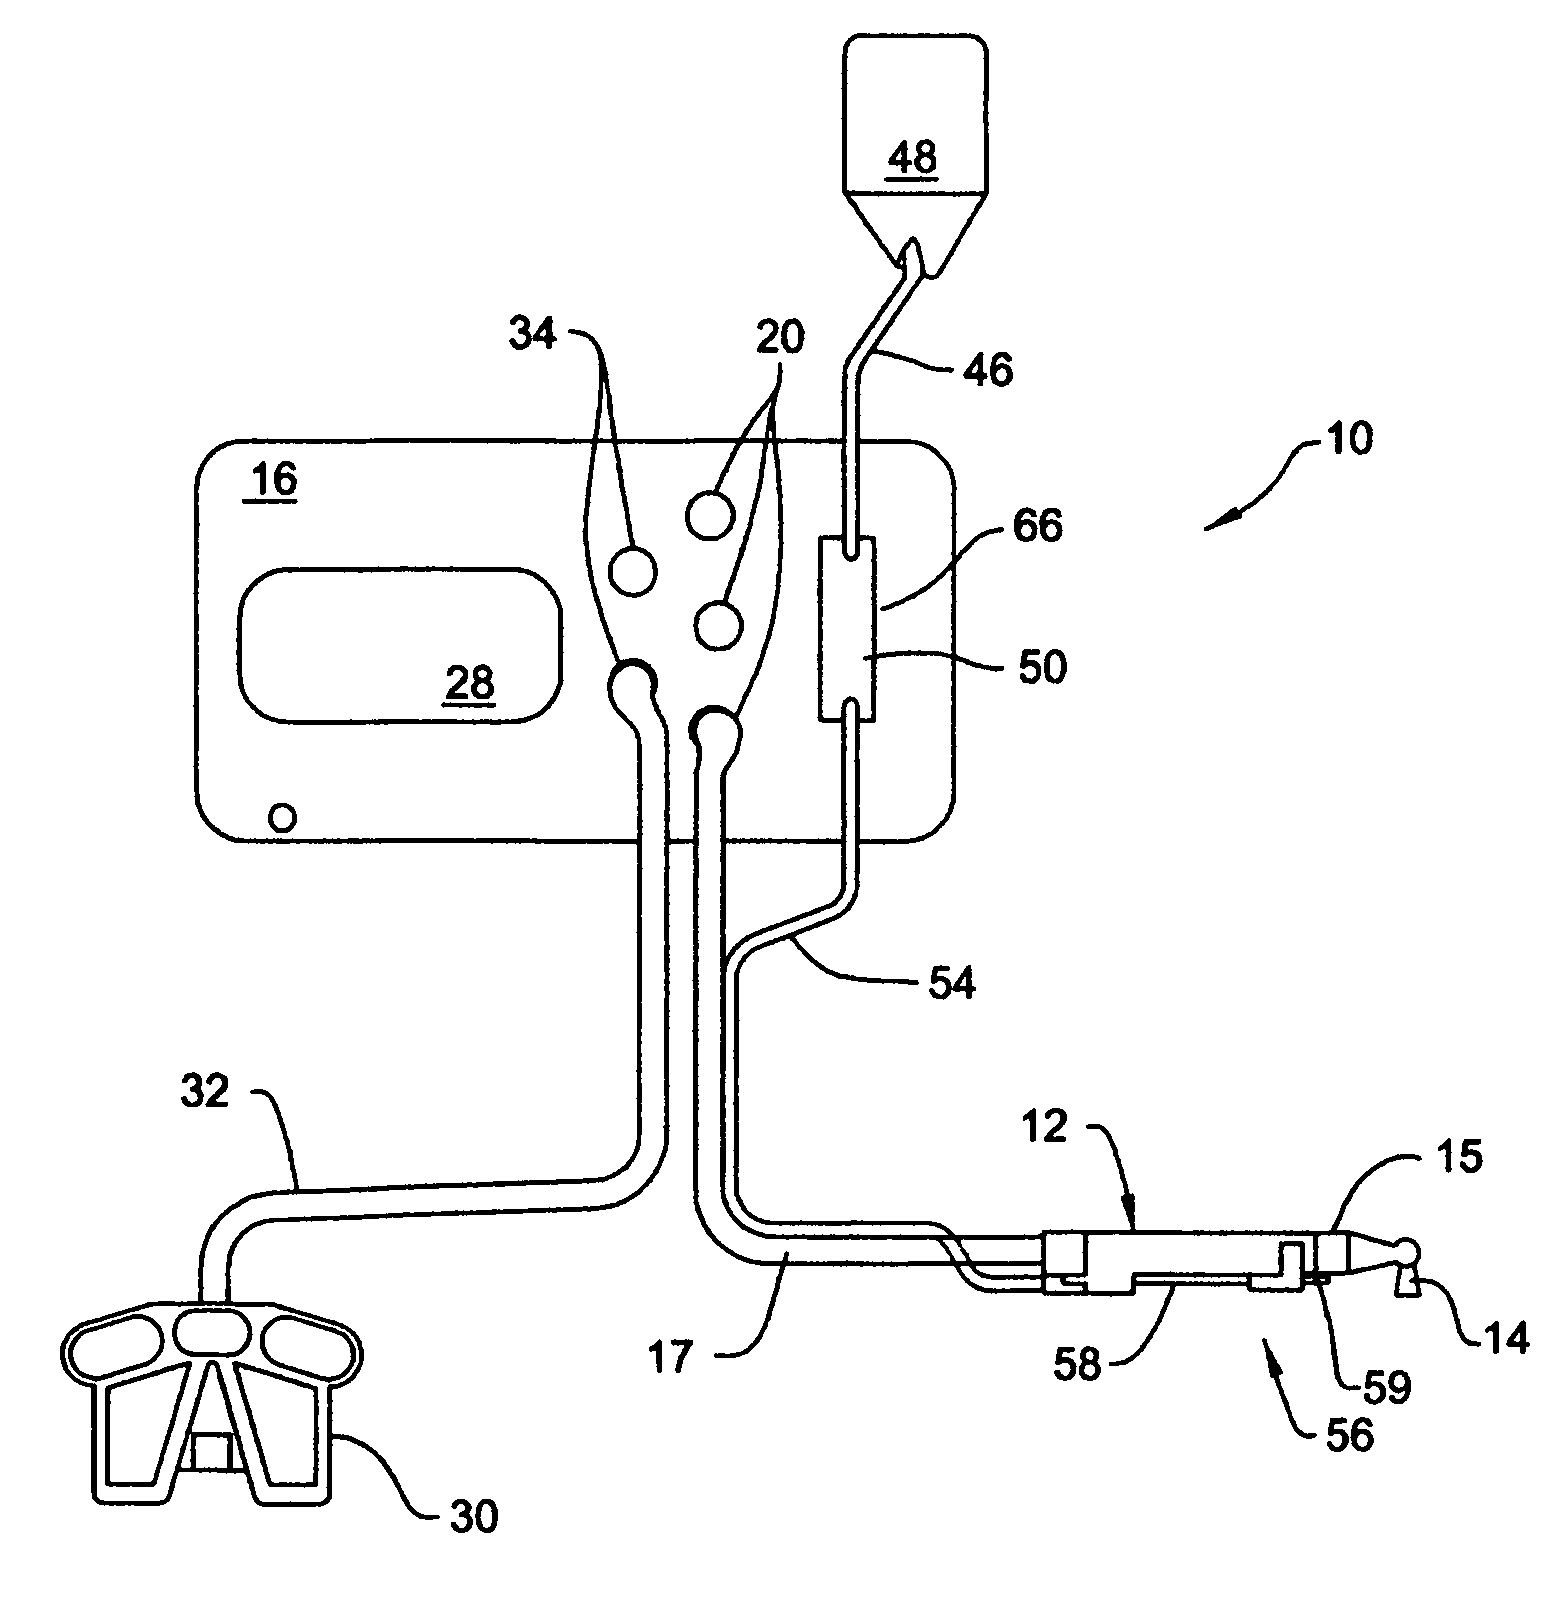 Method of operating a surgical irrigation pump capable of performing a priming operation